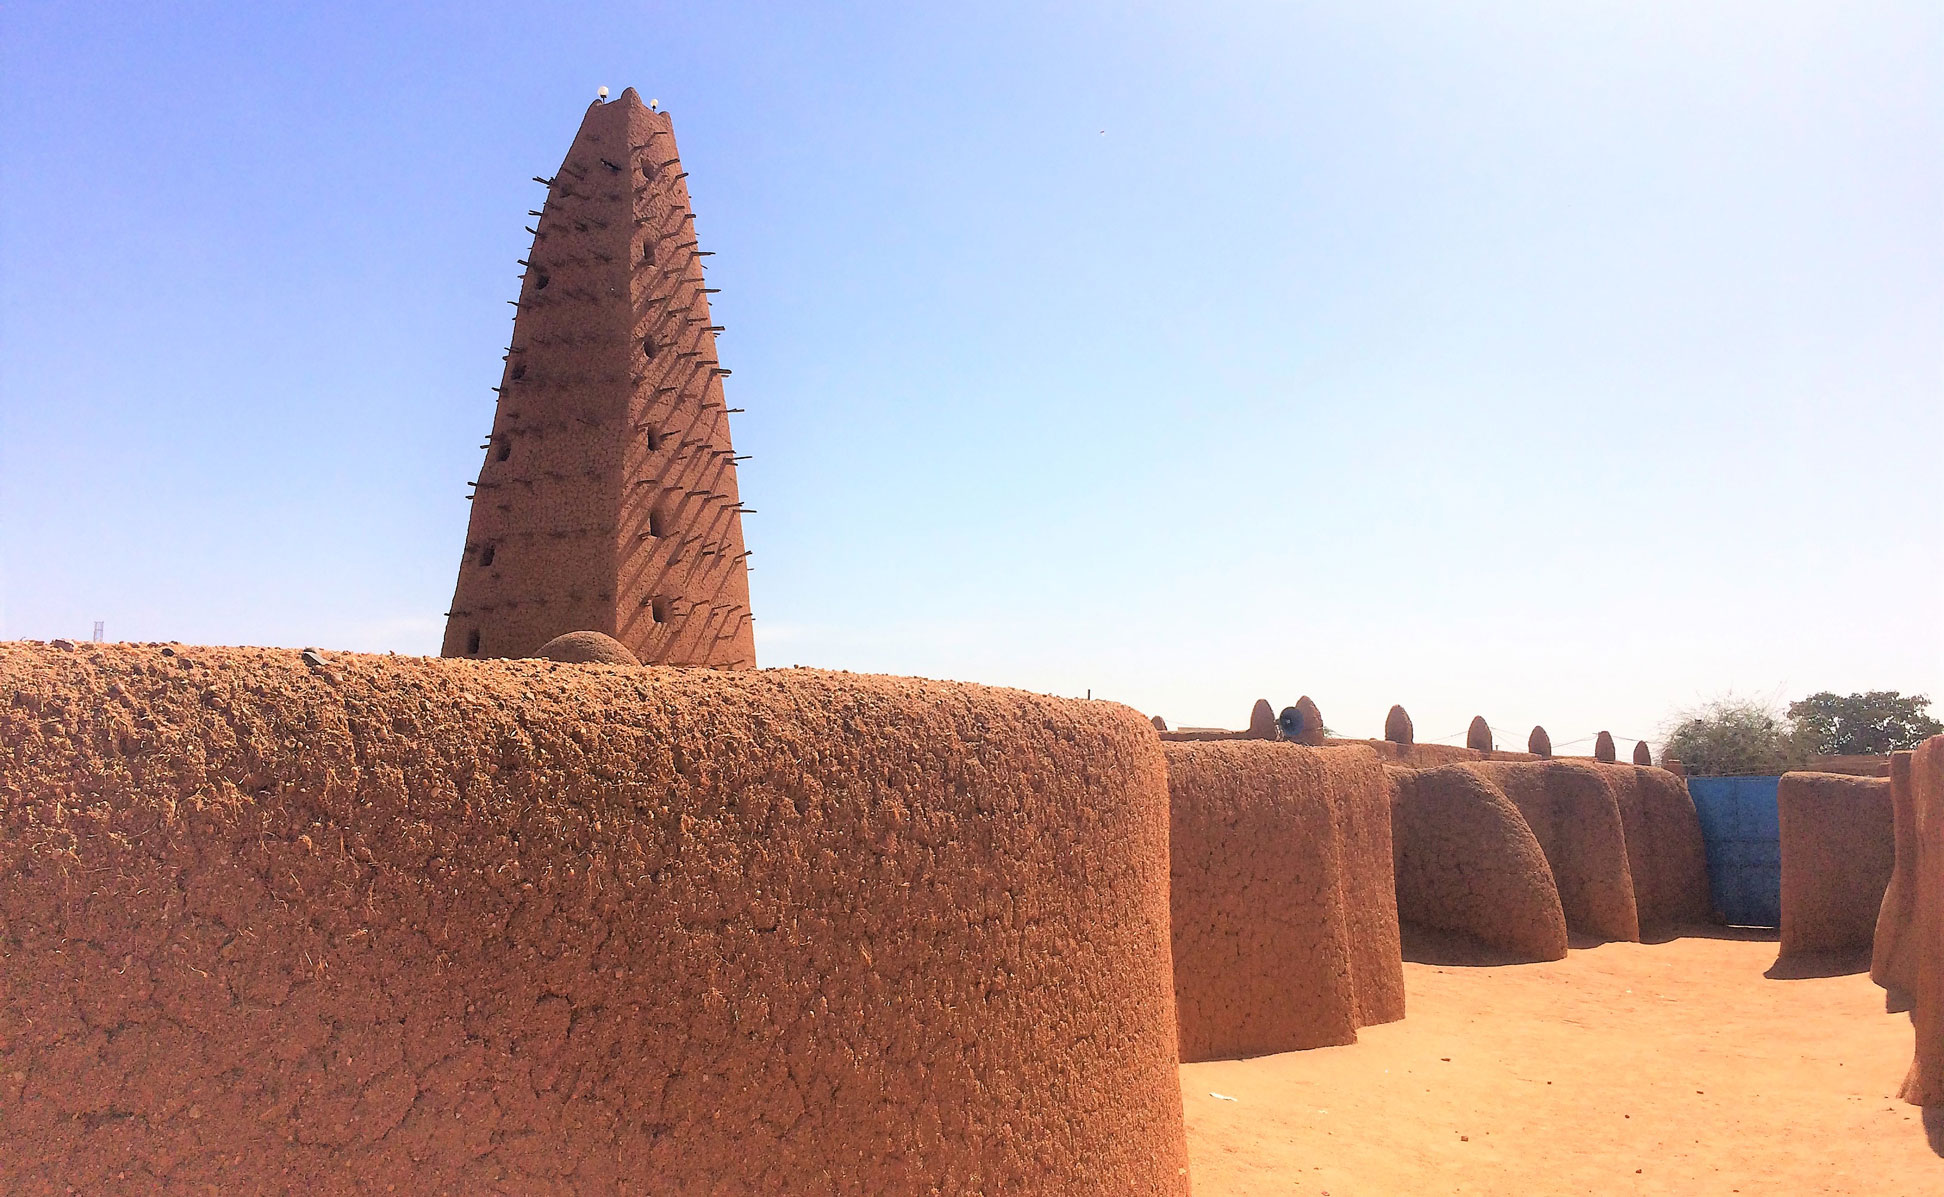 The mosque in Agadez is a famous landmark of Niger.